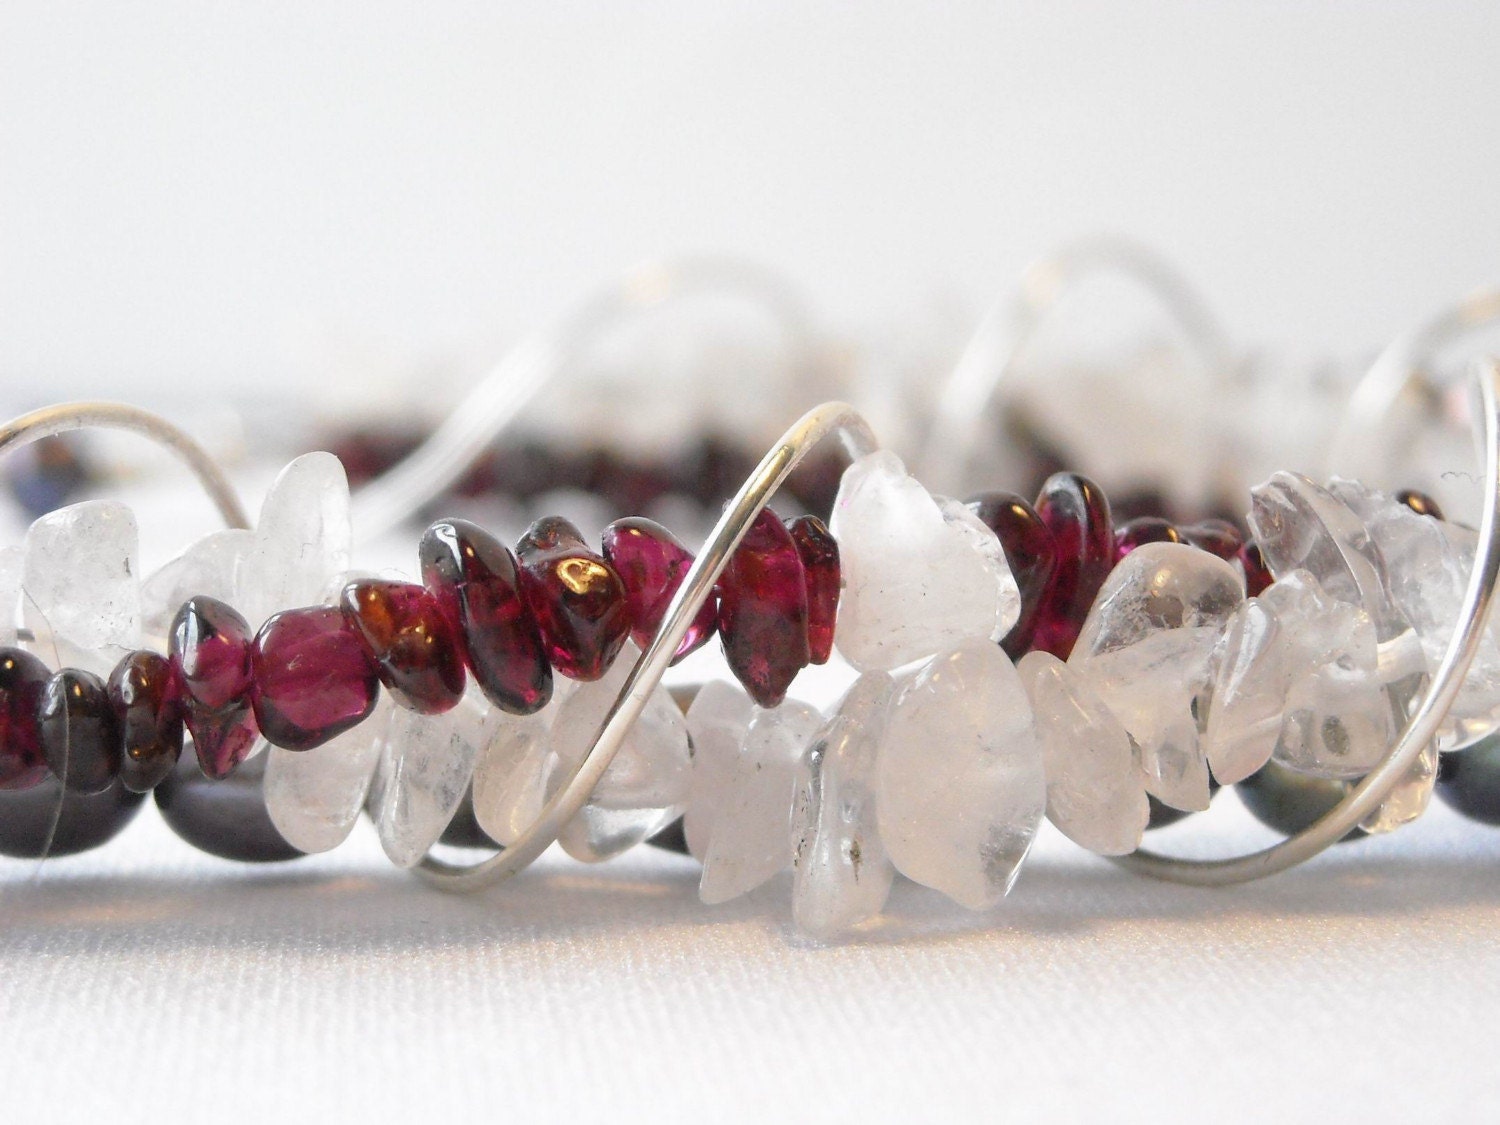 SHOW STOPPER - Garnet, Clear Quartz, Pearl and Sterling Silver Necklace